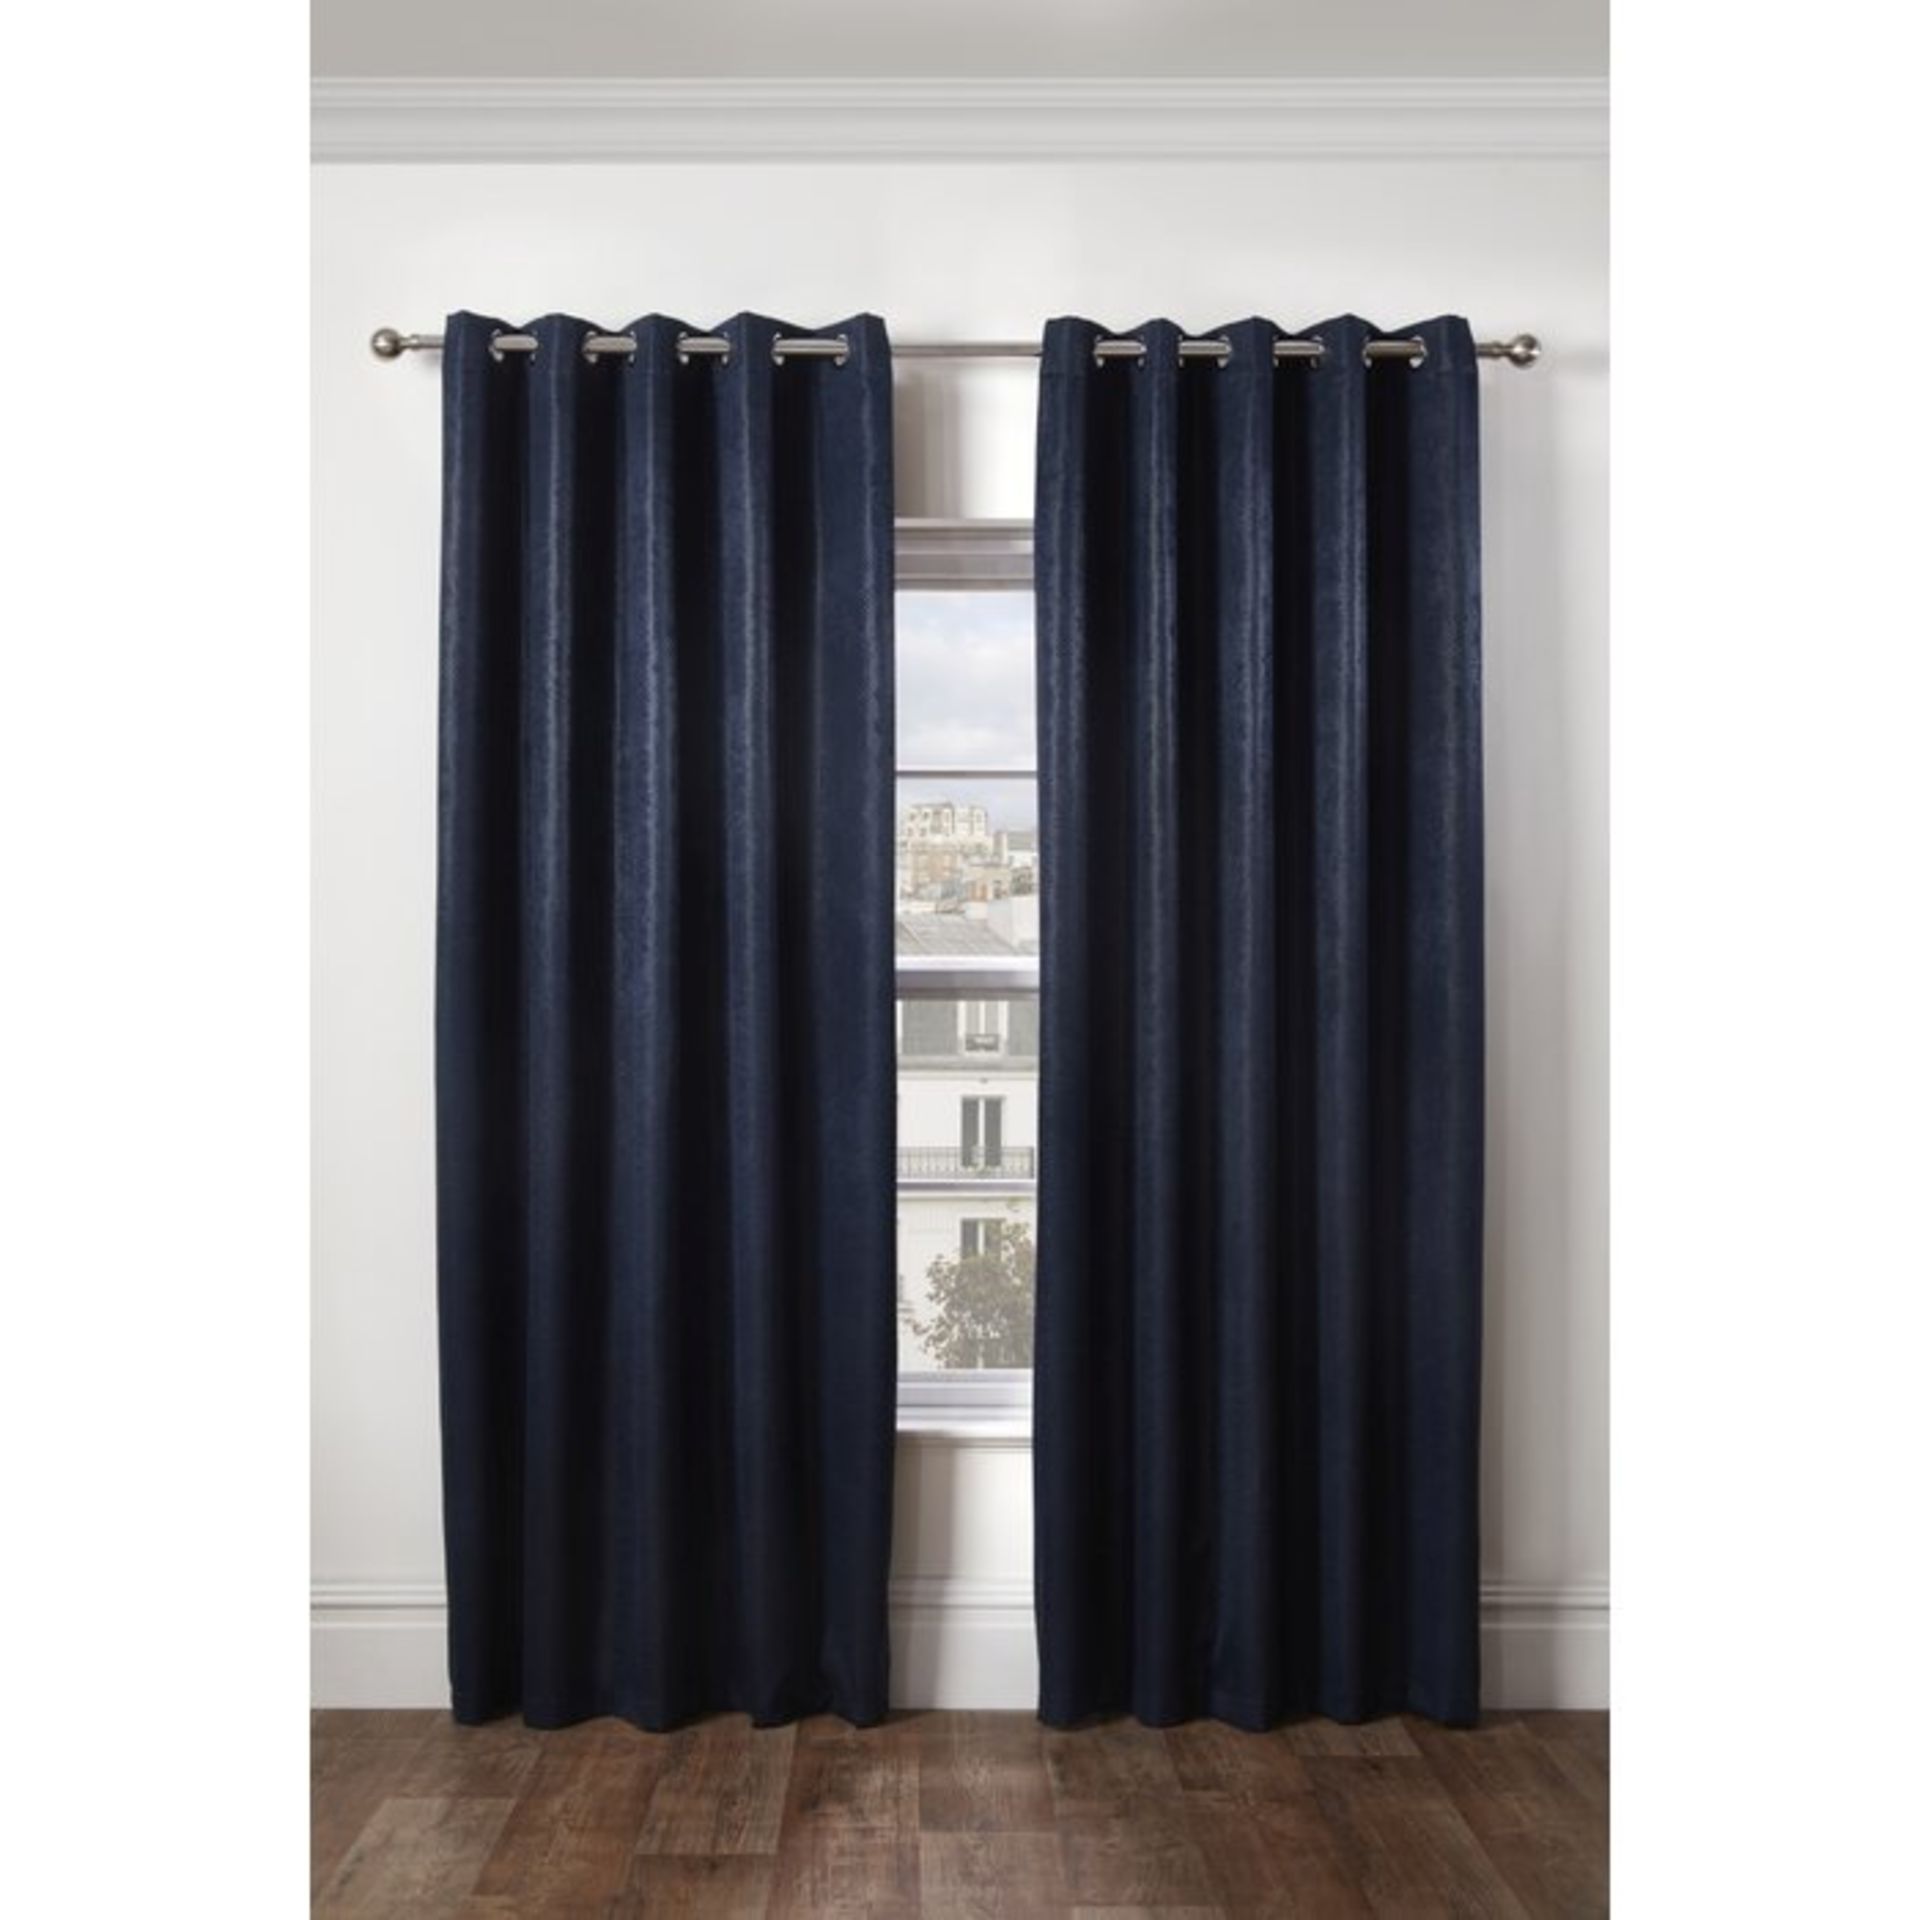 Vanhorne Ambiance Eyelet Blackout Thermal Curtains - RRP £28.99 - Image 2 of 2